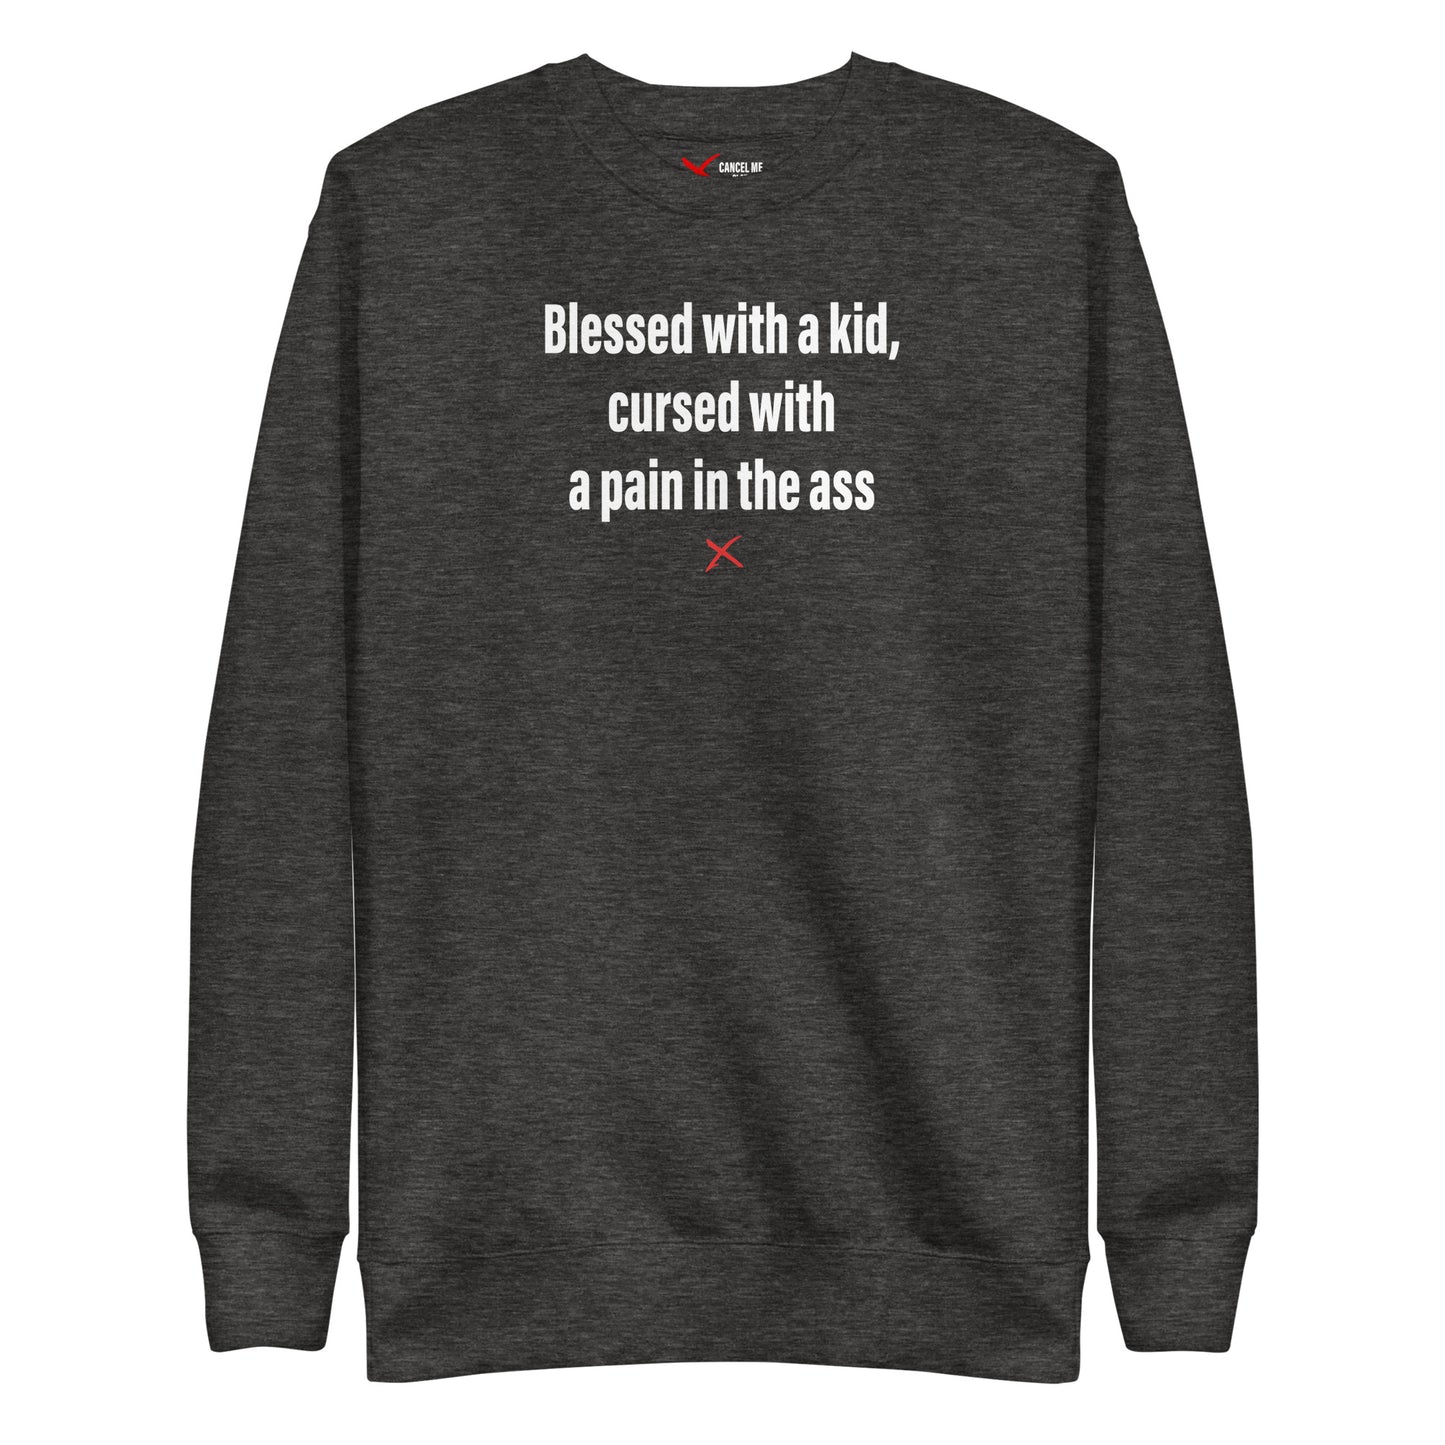 Blessed with a kid, cursed with a pain in the ass - Sweatshirt